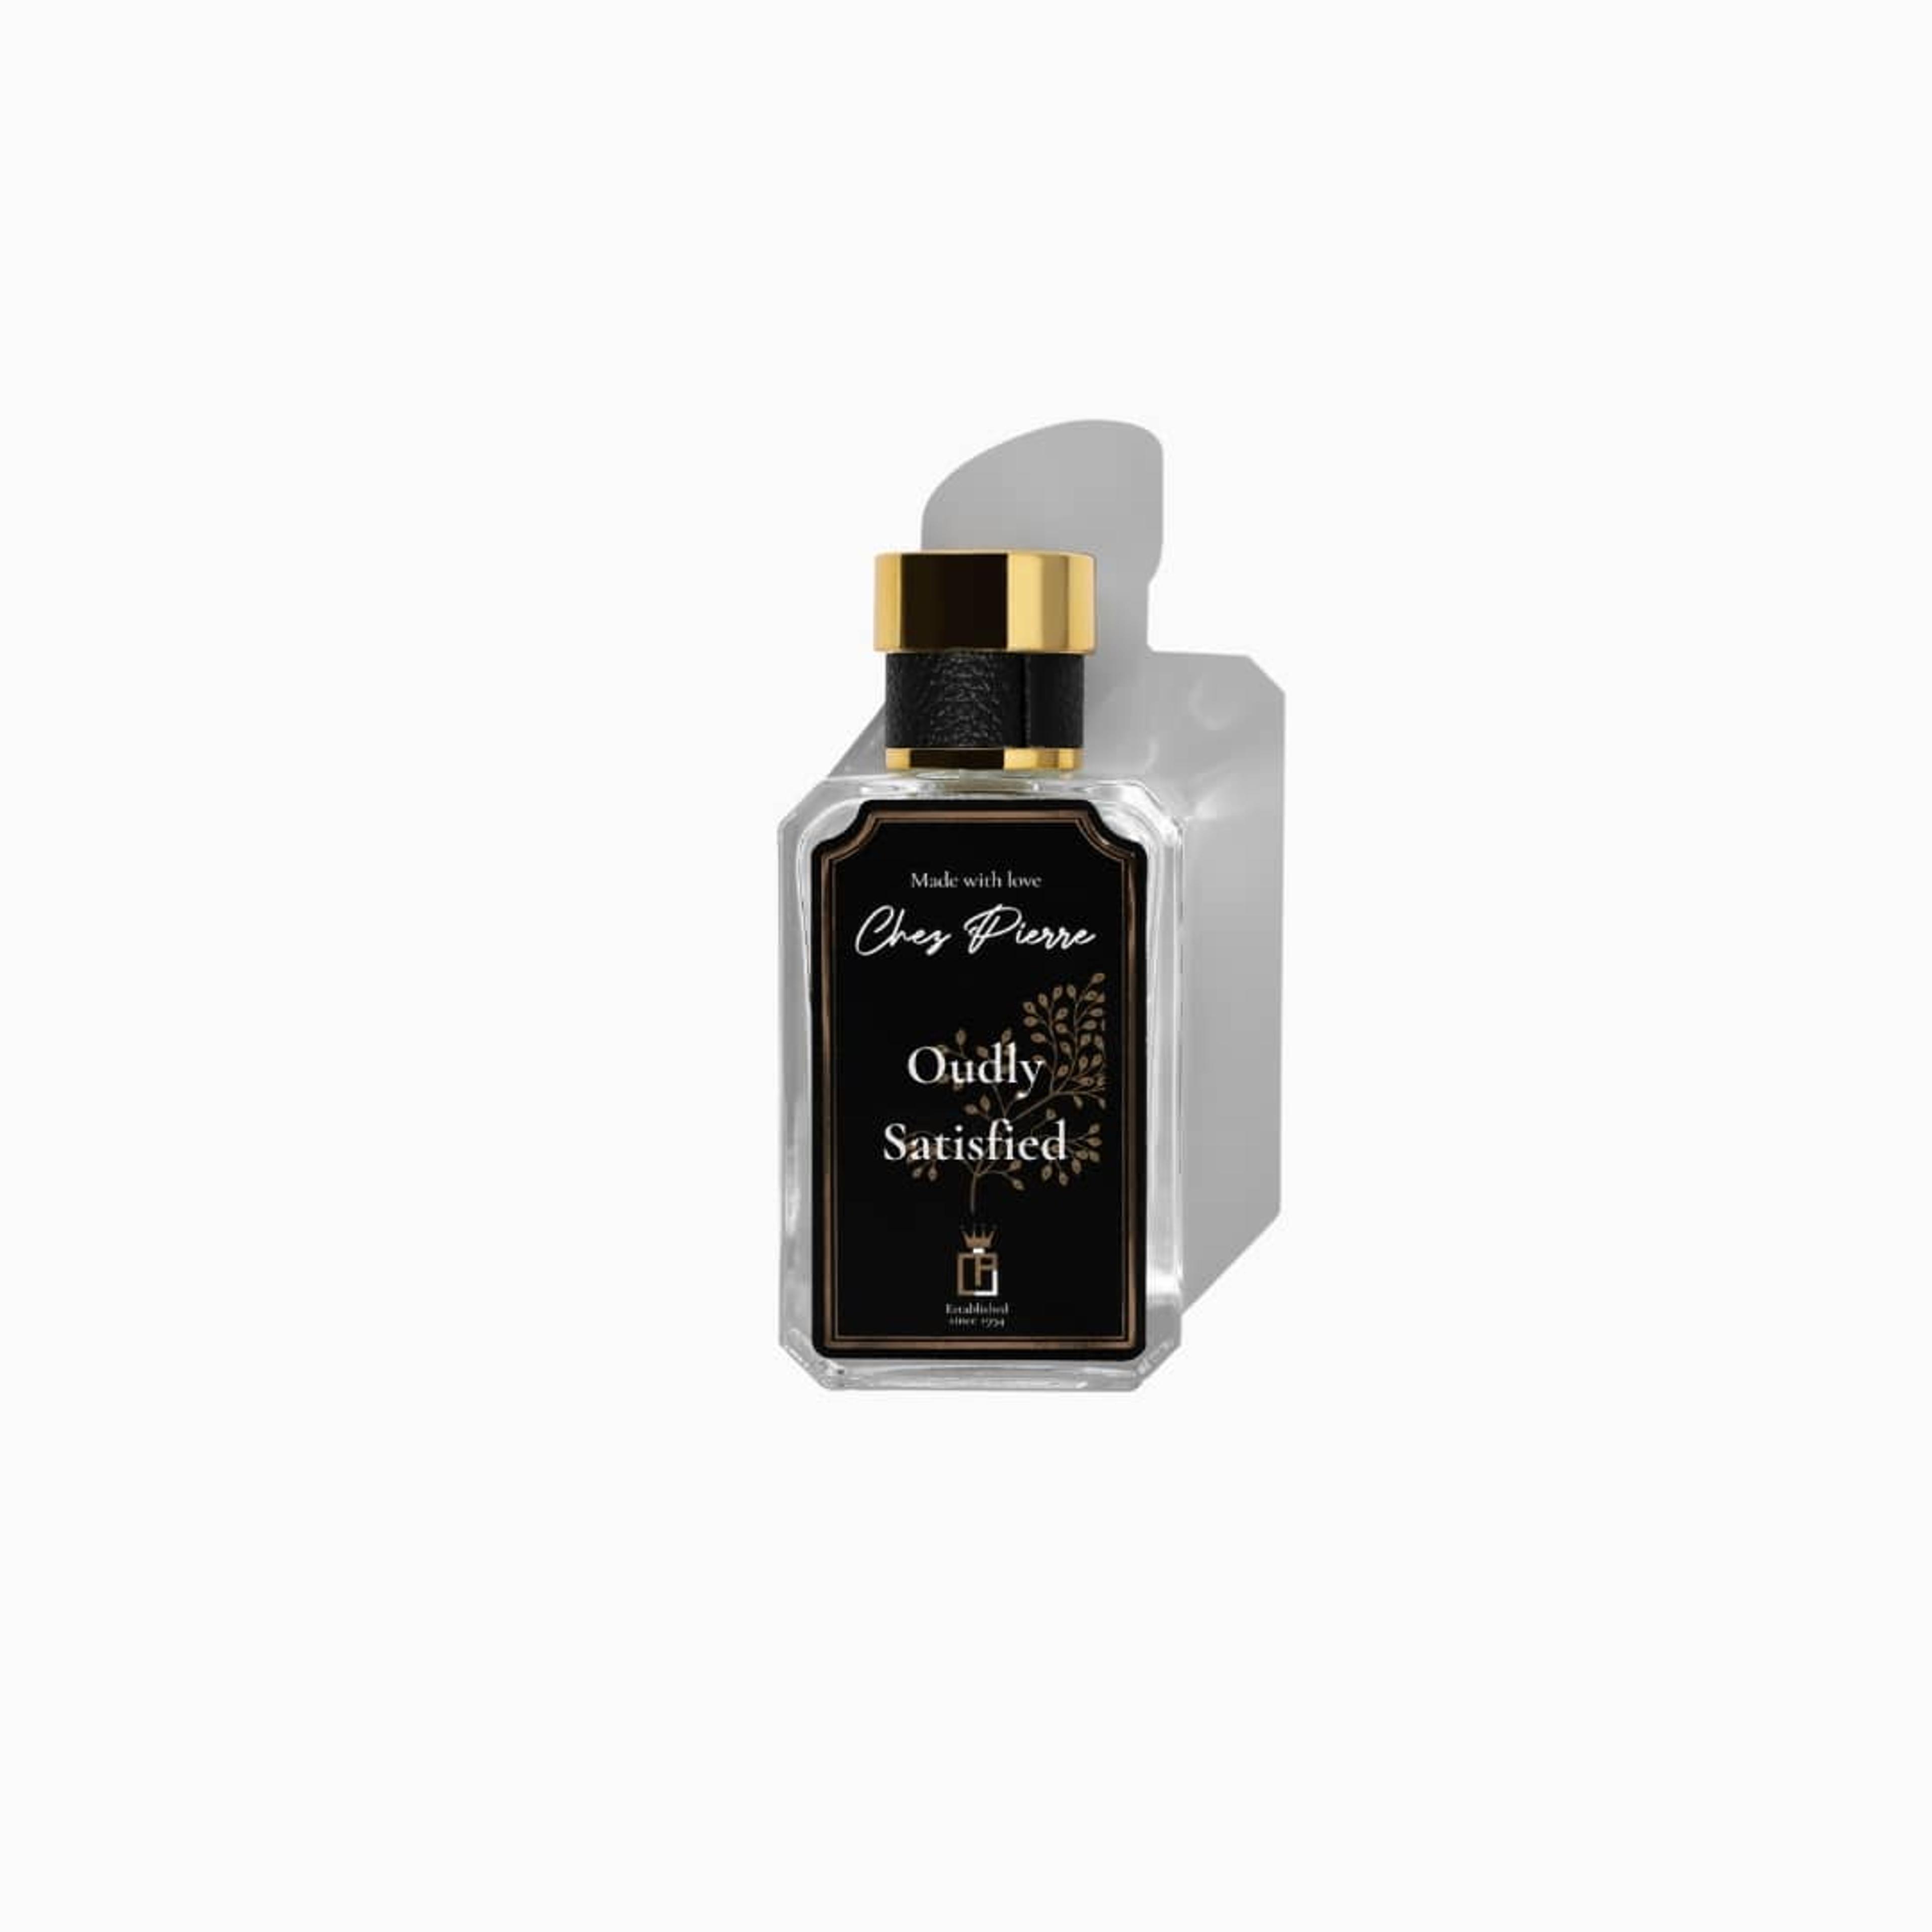 Chez Pierre's Oudly Satisfied Perfume Inspired By Tom Ford Tobacco Oud Perfume